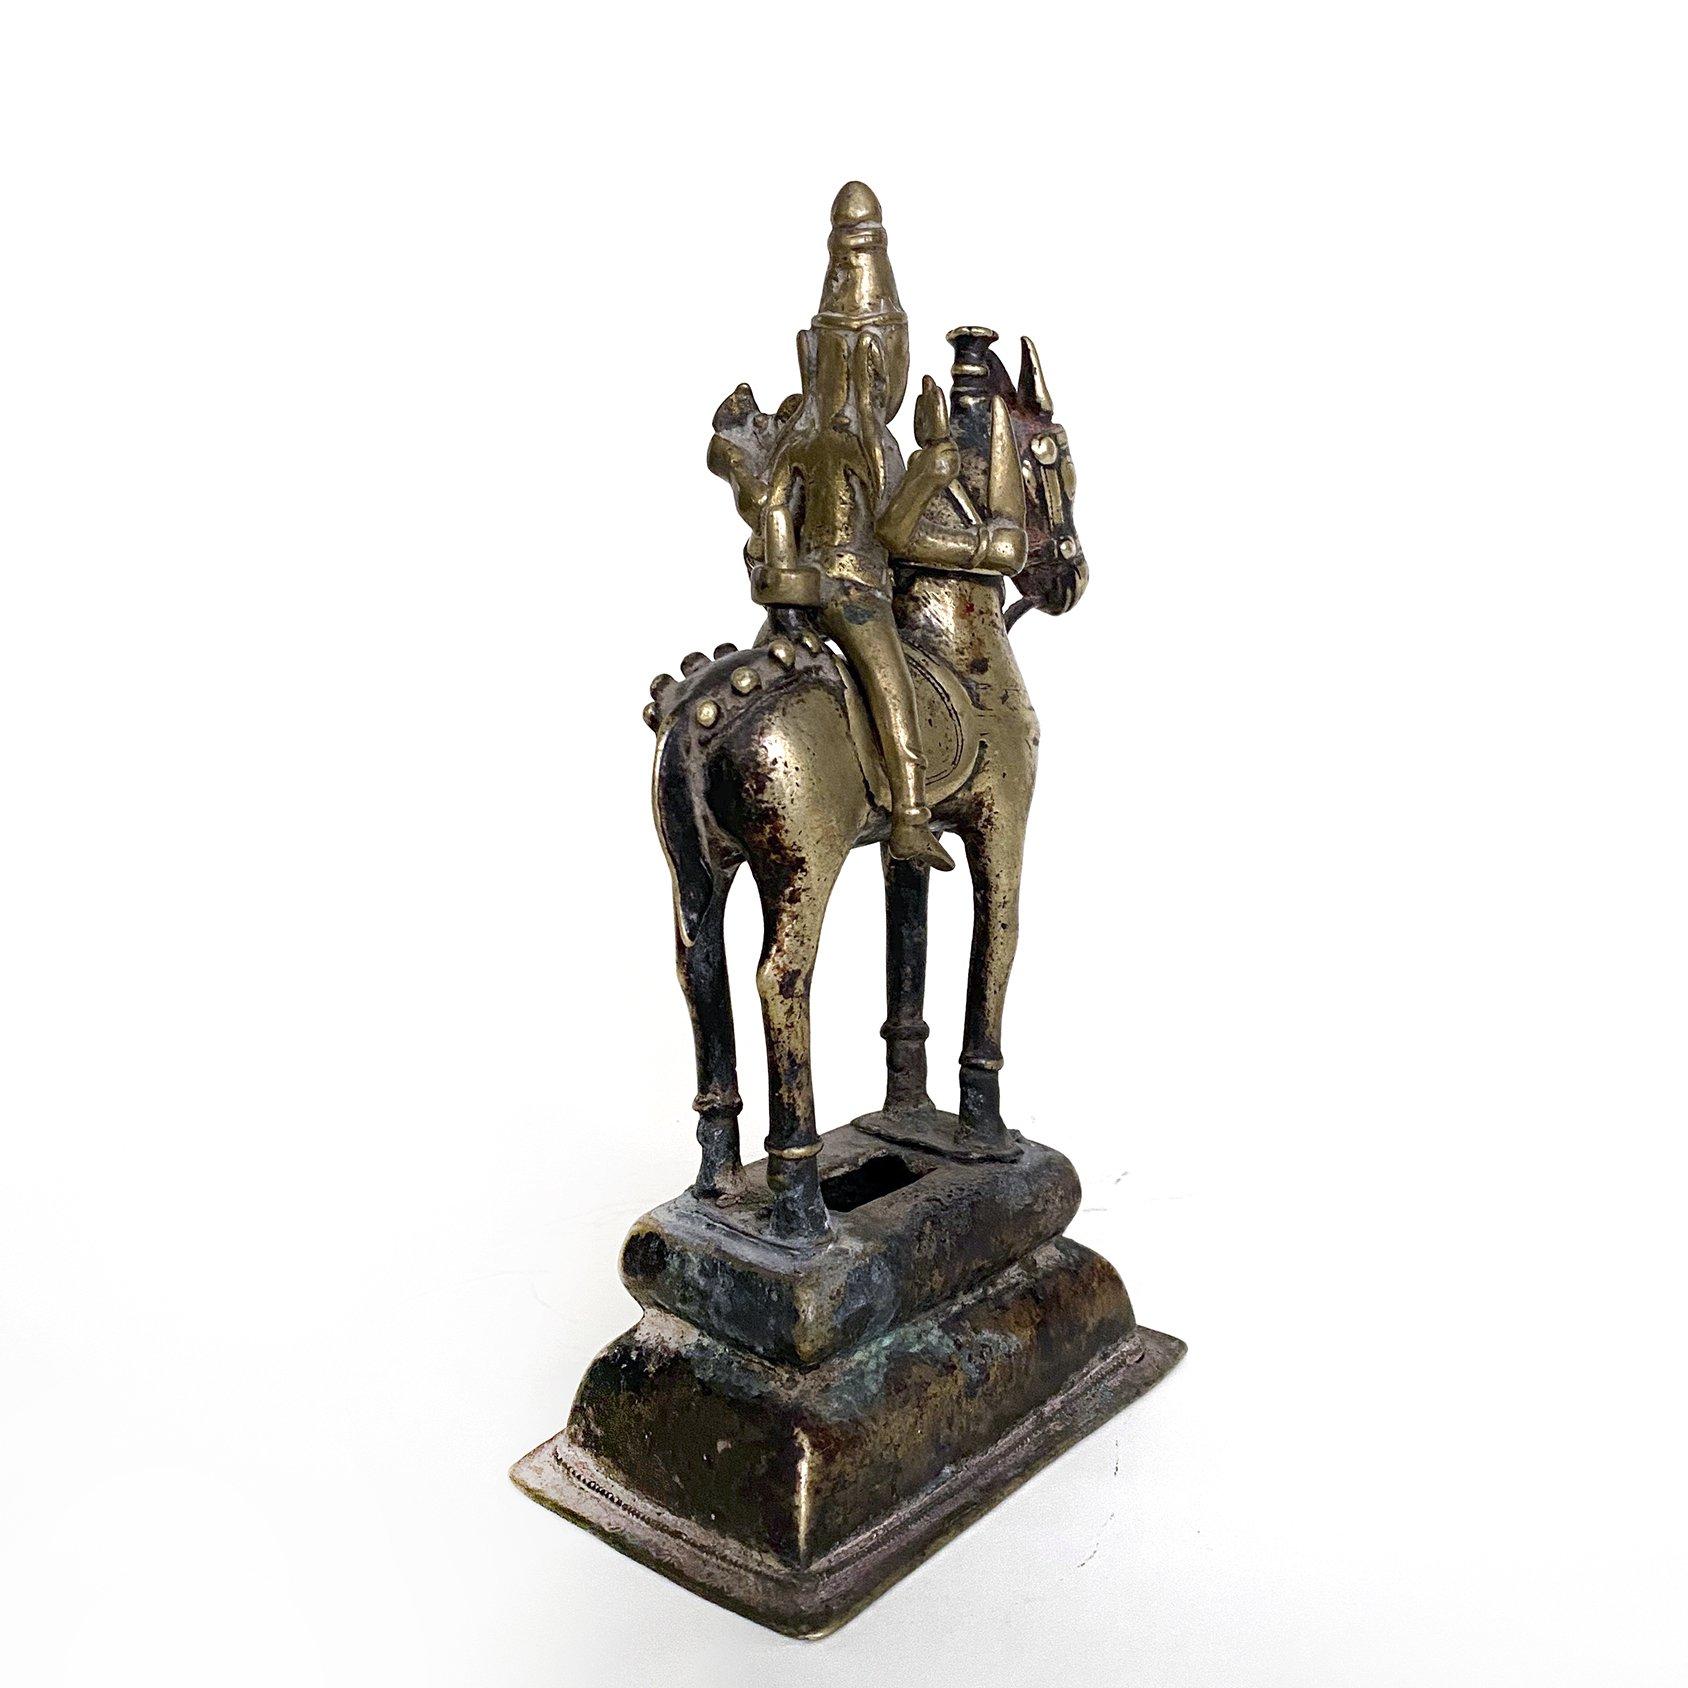 Four armed Shiva on horse holding Uma, brass bronze, India, 19th century.
The God Shiva with four arms astride on a horse, one arm holding Uma, his wife and on the upper right hand holding a trident. Mounted on a brass pedestal, the figure of Shiva